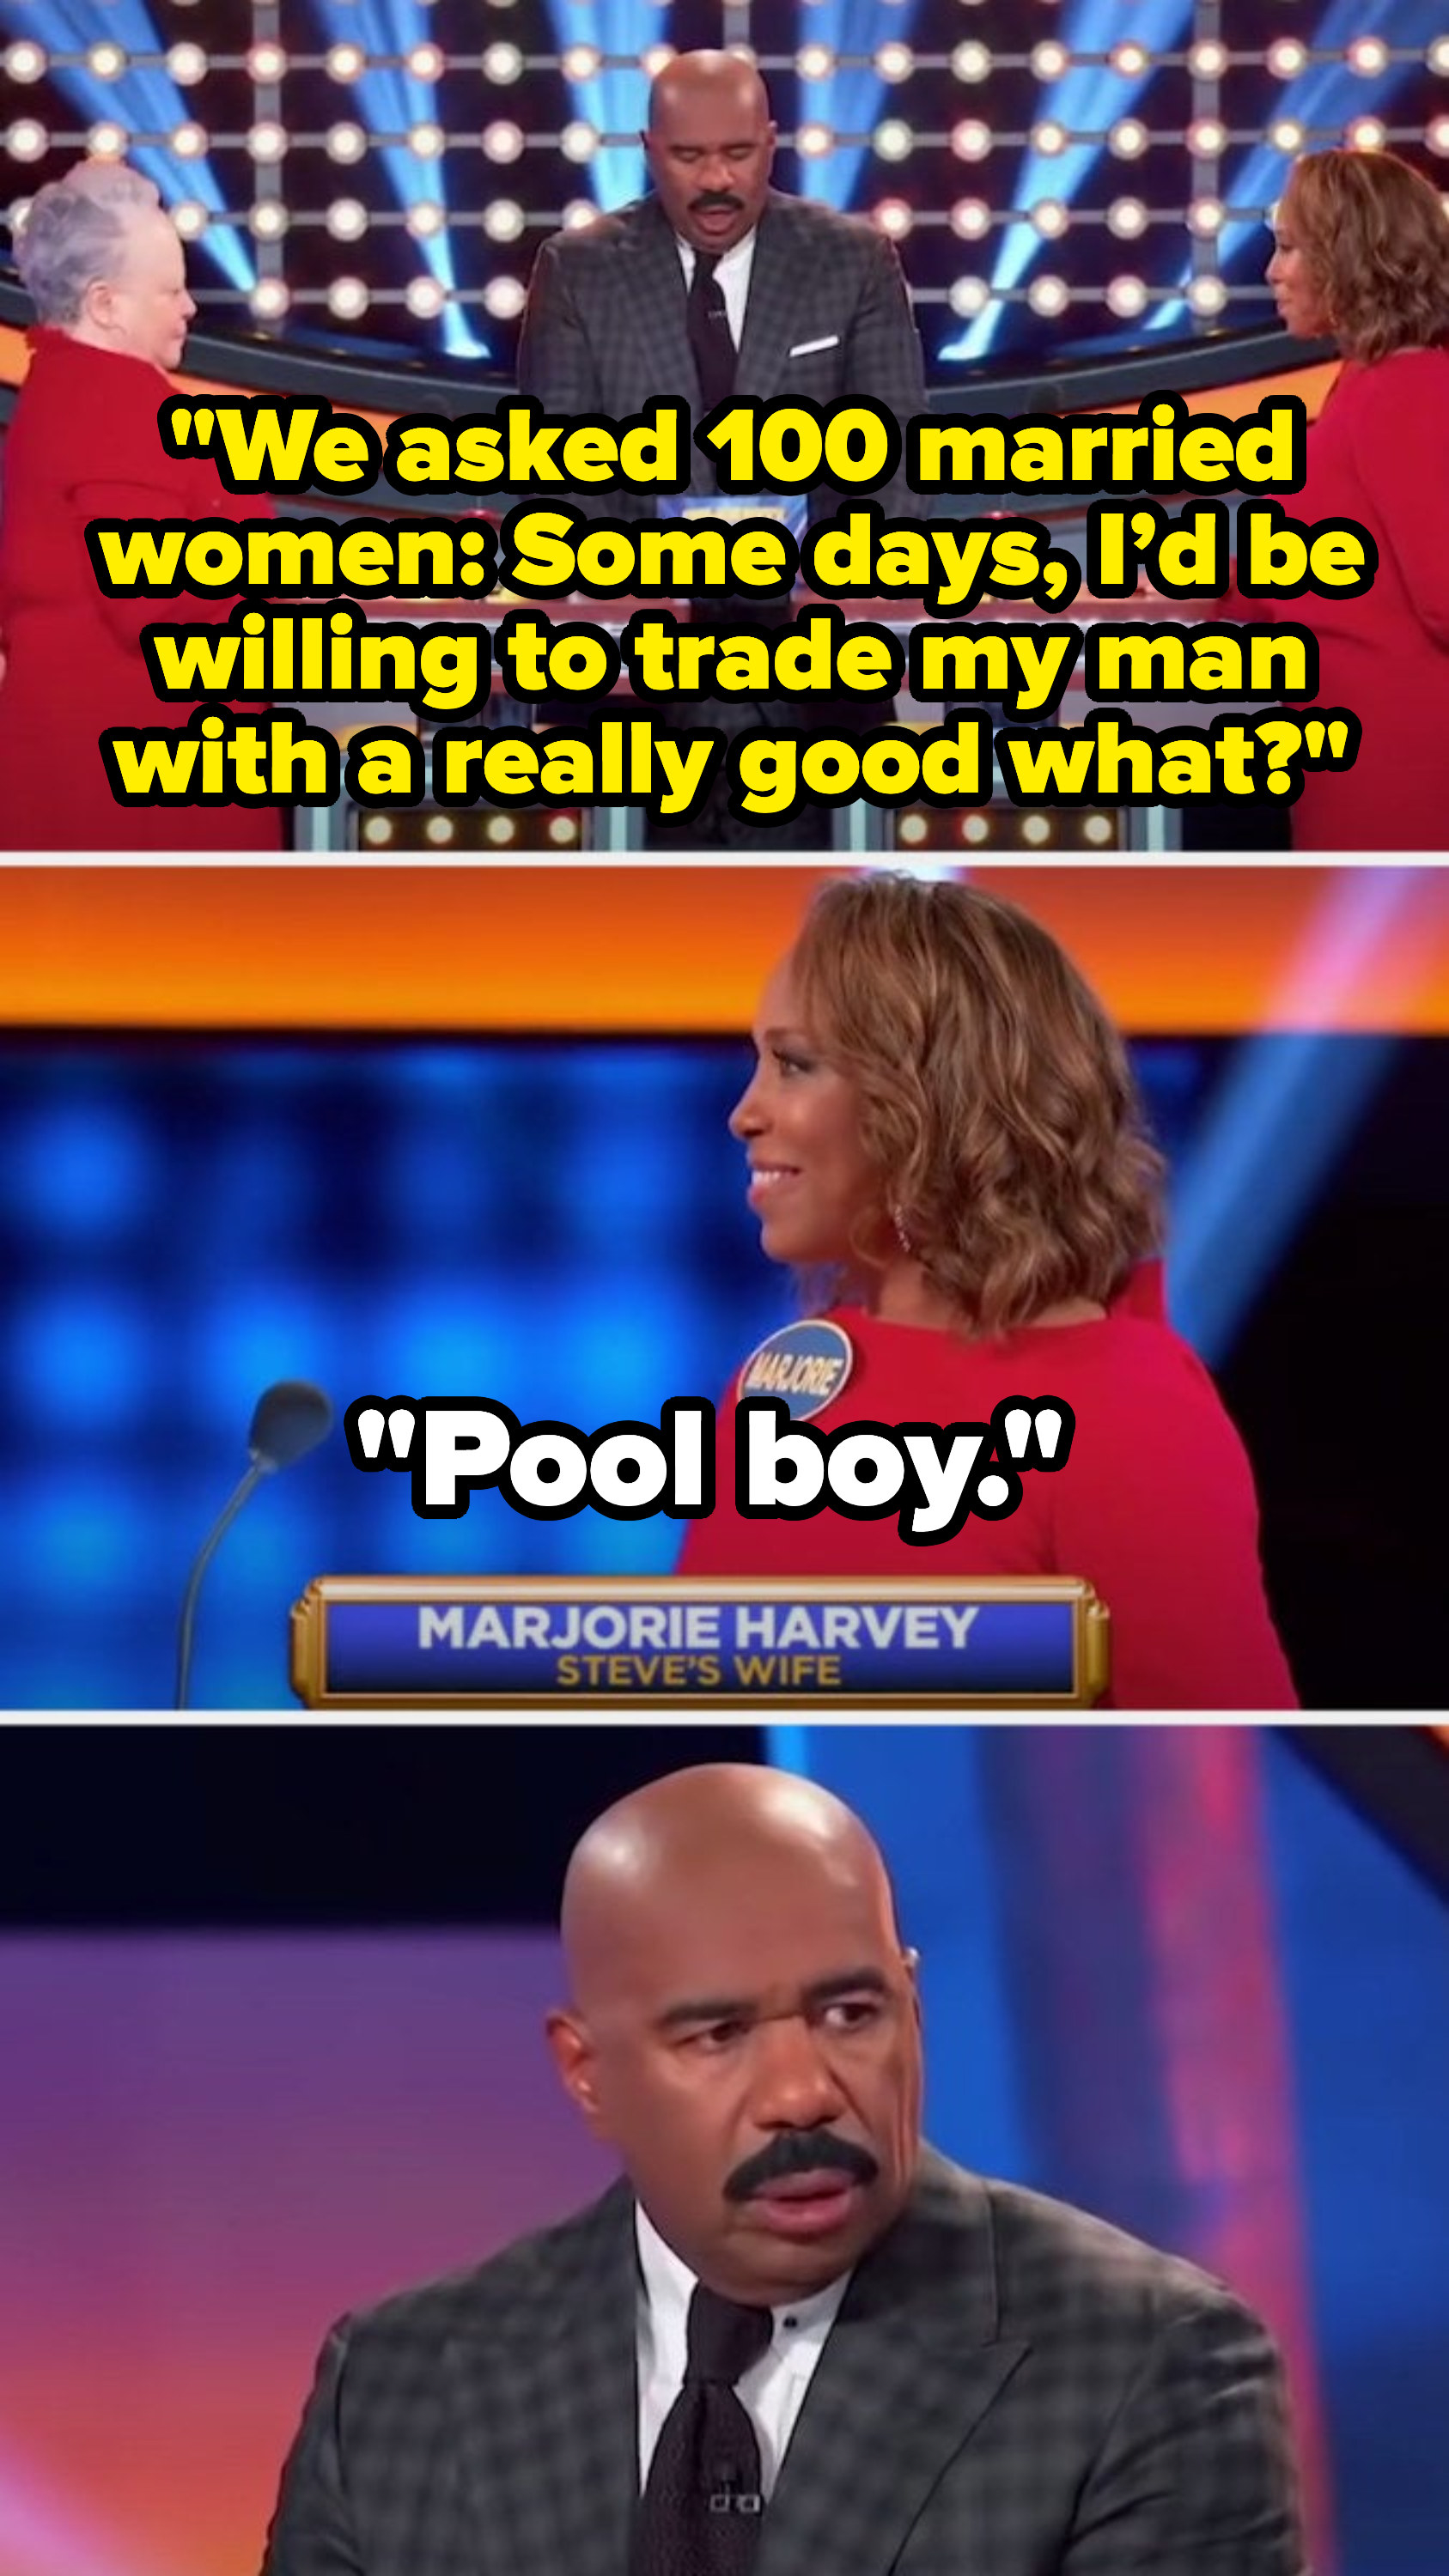 Question: &quot;We asked 100 married women: Some days, I&#x27;d be willing to trade my man with a really good what?&quot; Answer from Marjorie: &quot;Pool boy&quot;